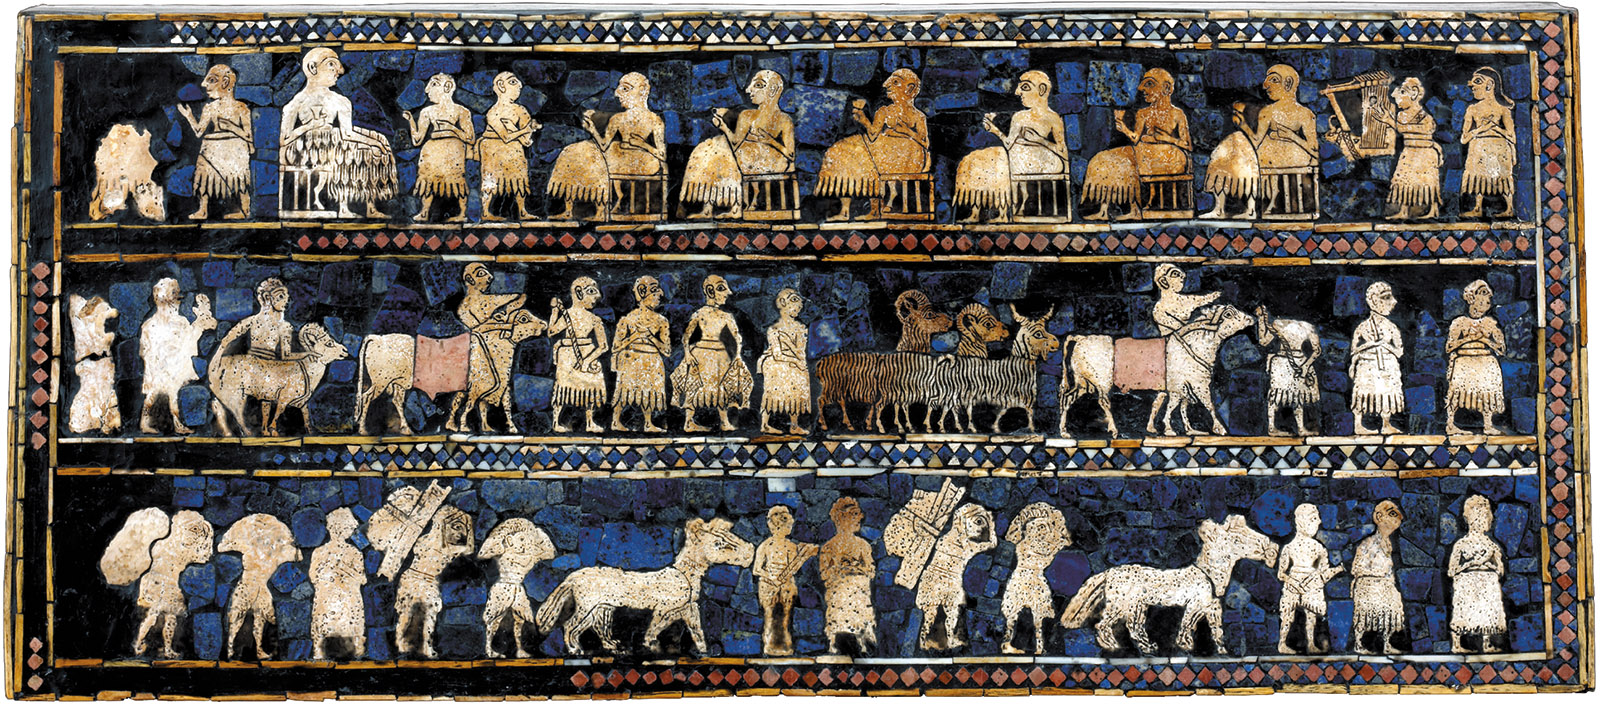 A panel from the Sumerian Standard of Ur depicting fish, animals, and goods being brought in procession to a banquet, circa 2600 BC